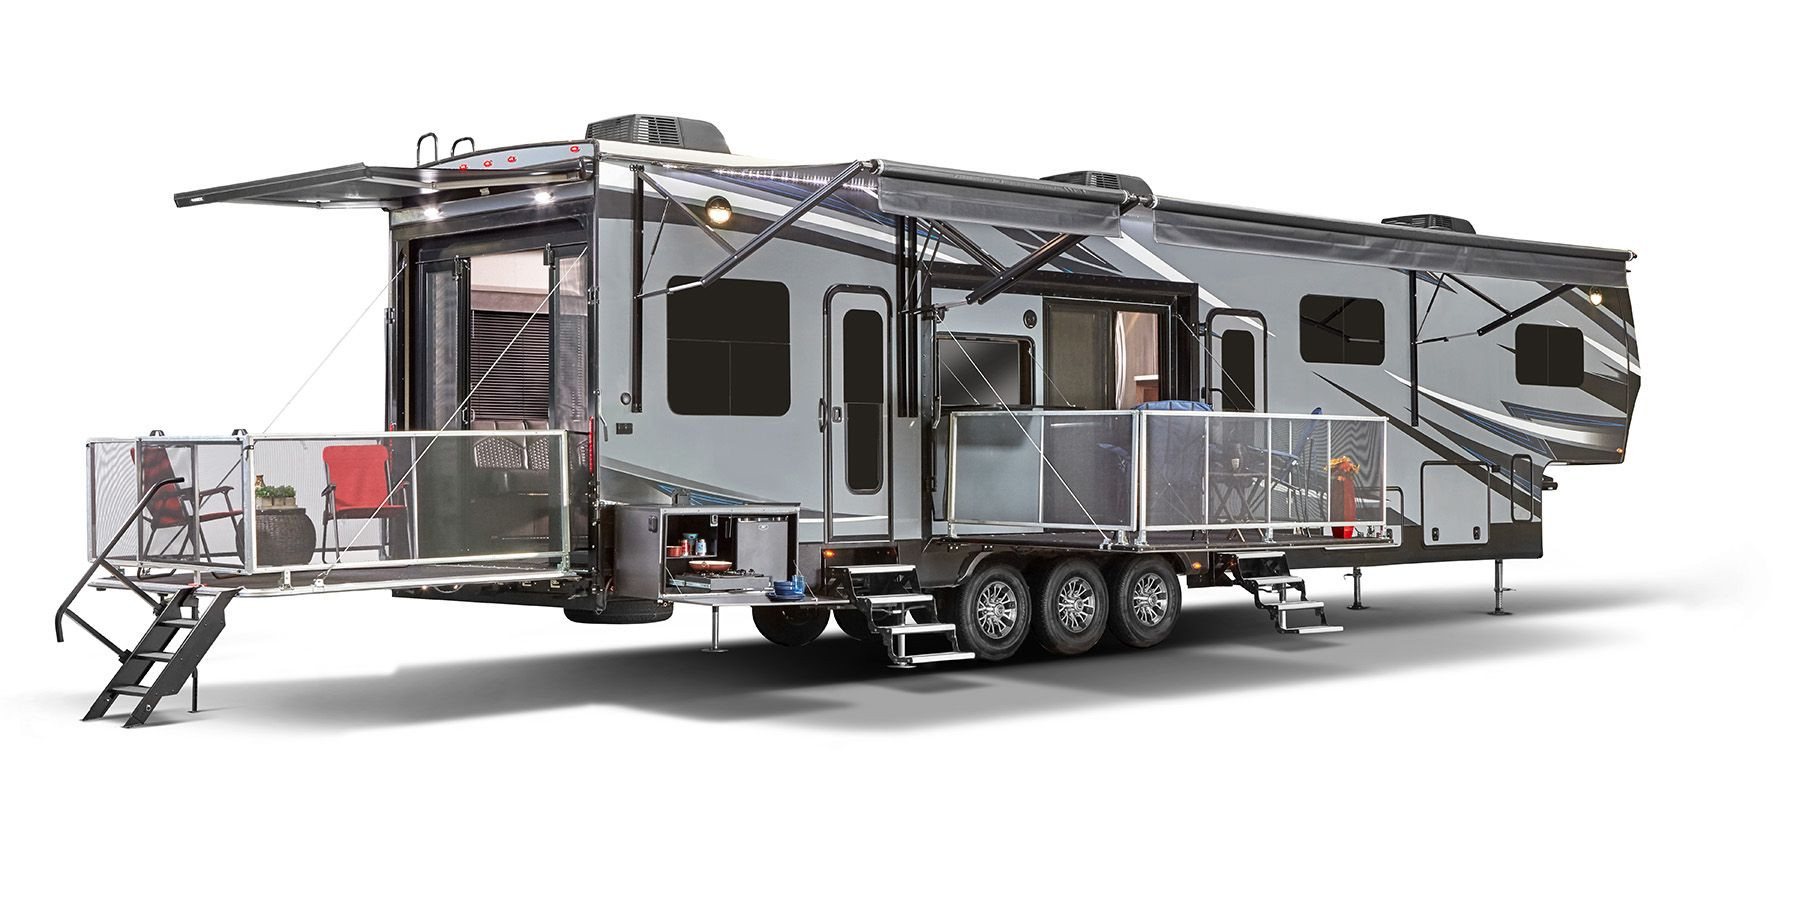 Toy Hauler With Outdoor Kitchen
 2018 Seismic Toy Haulers